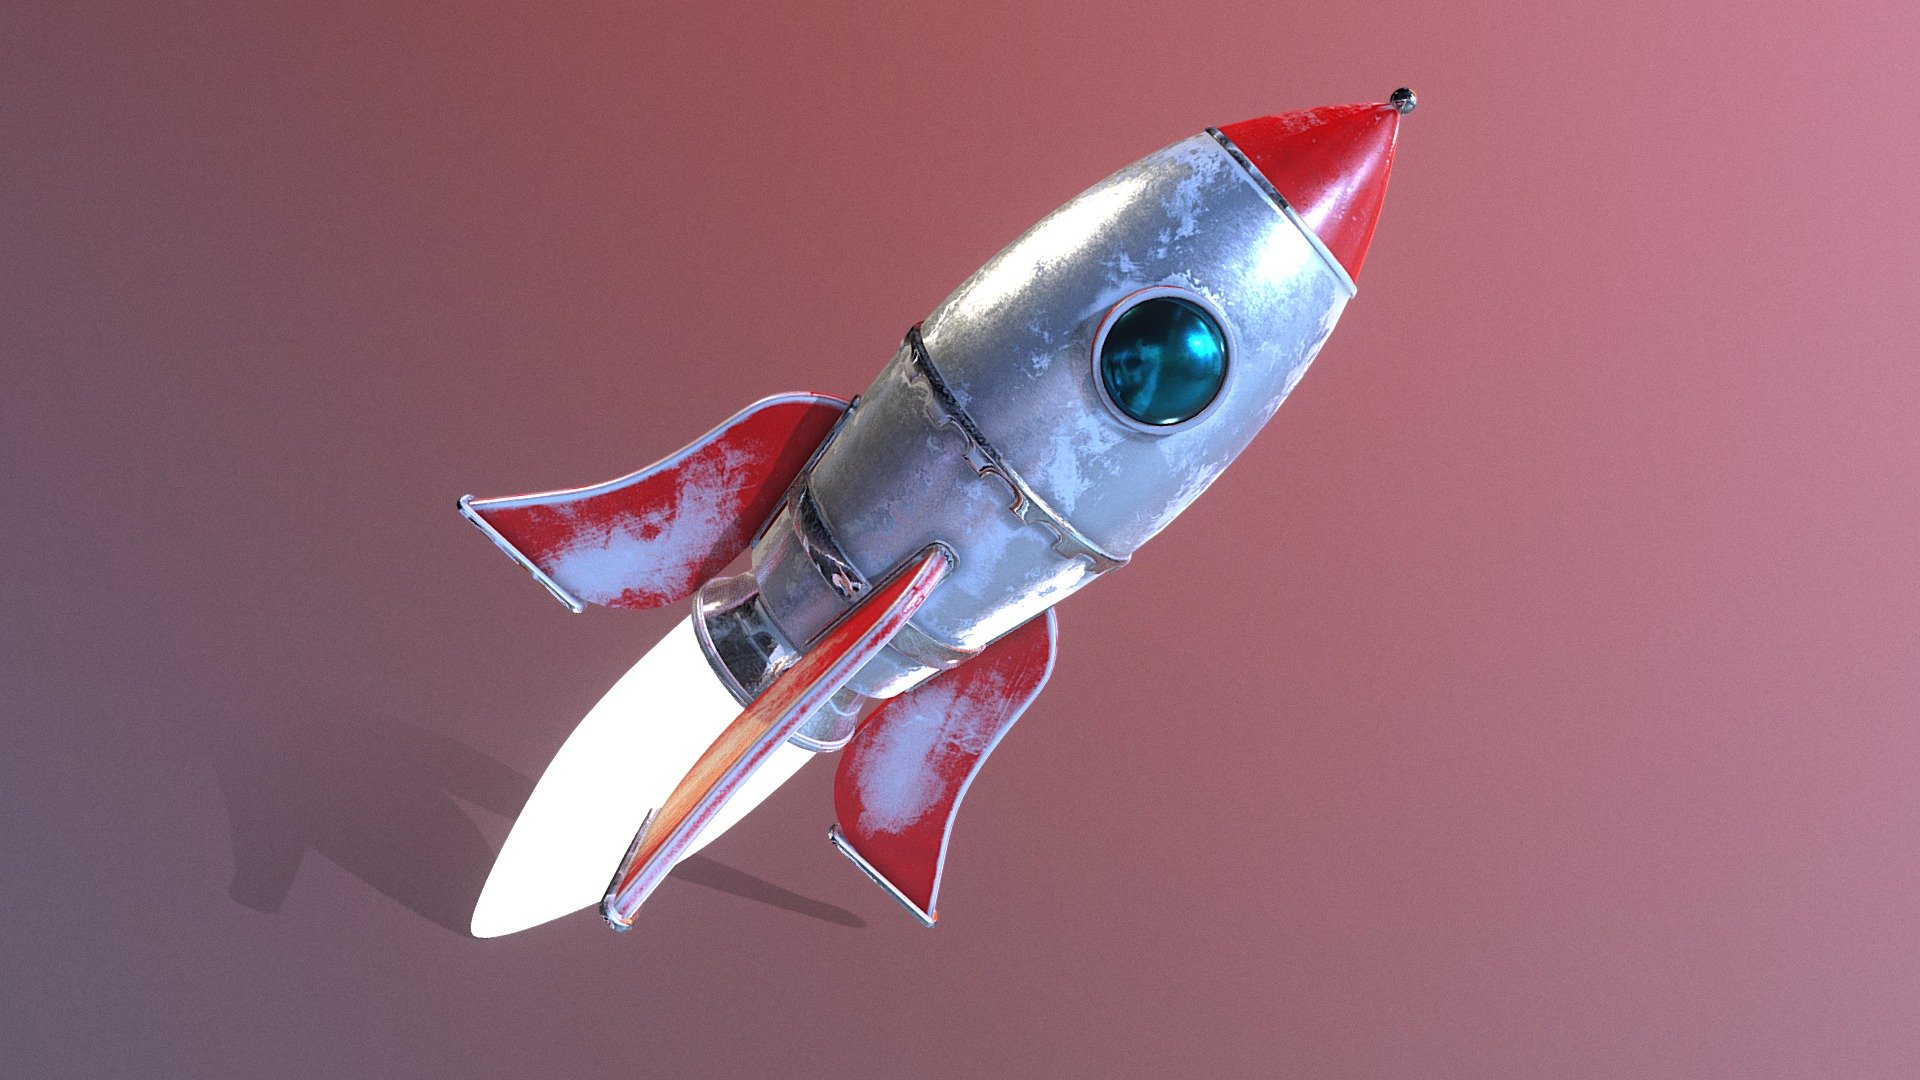 Take flight off into space!
This model can be perfectly used for games and 3D printing 3d model